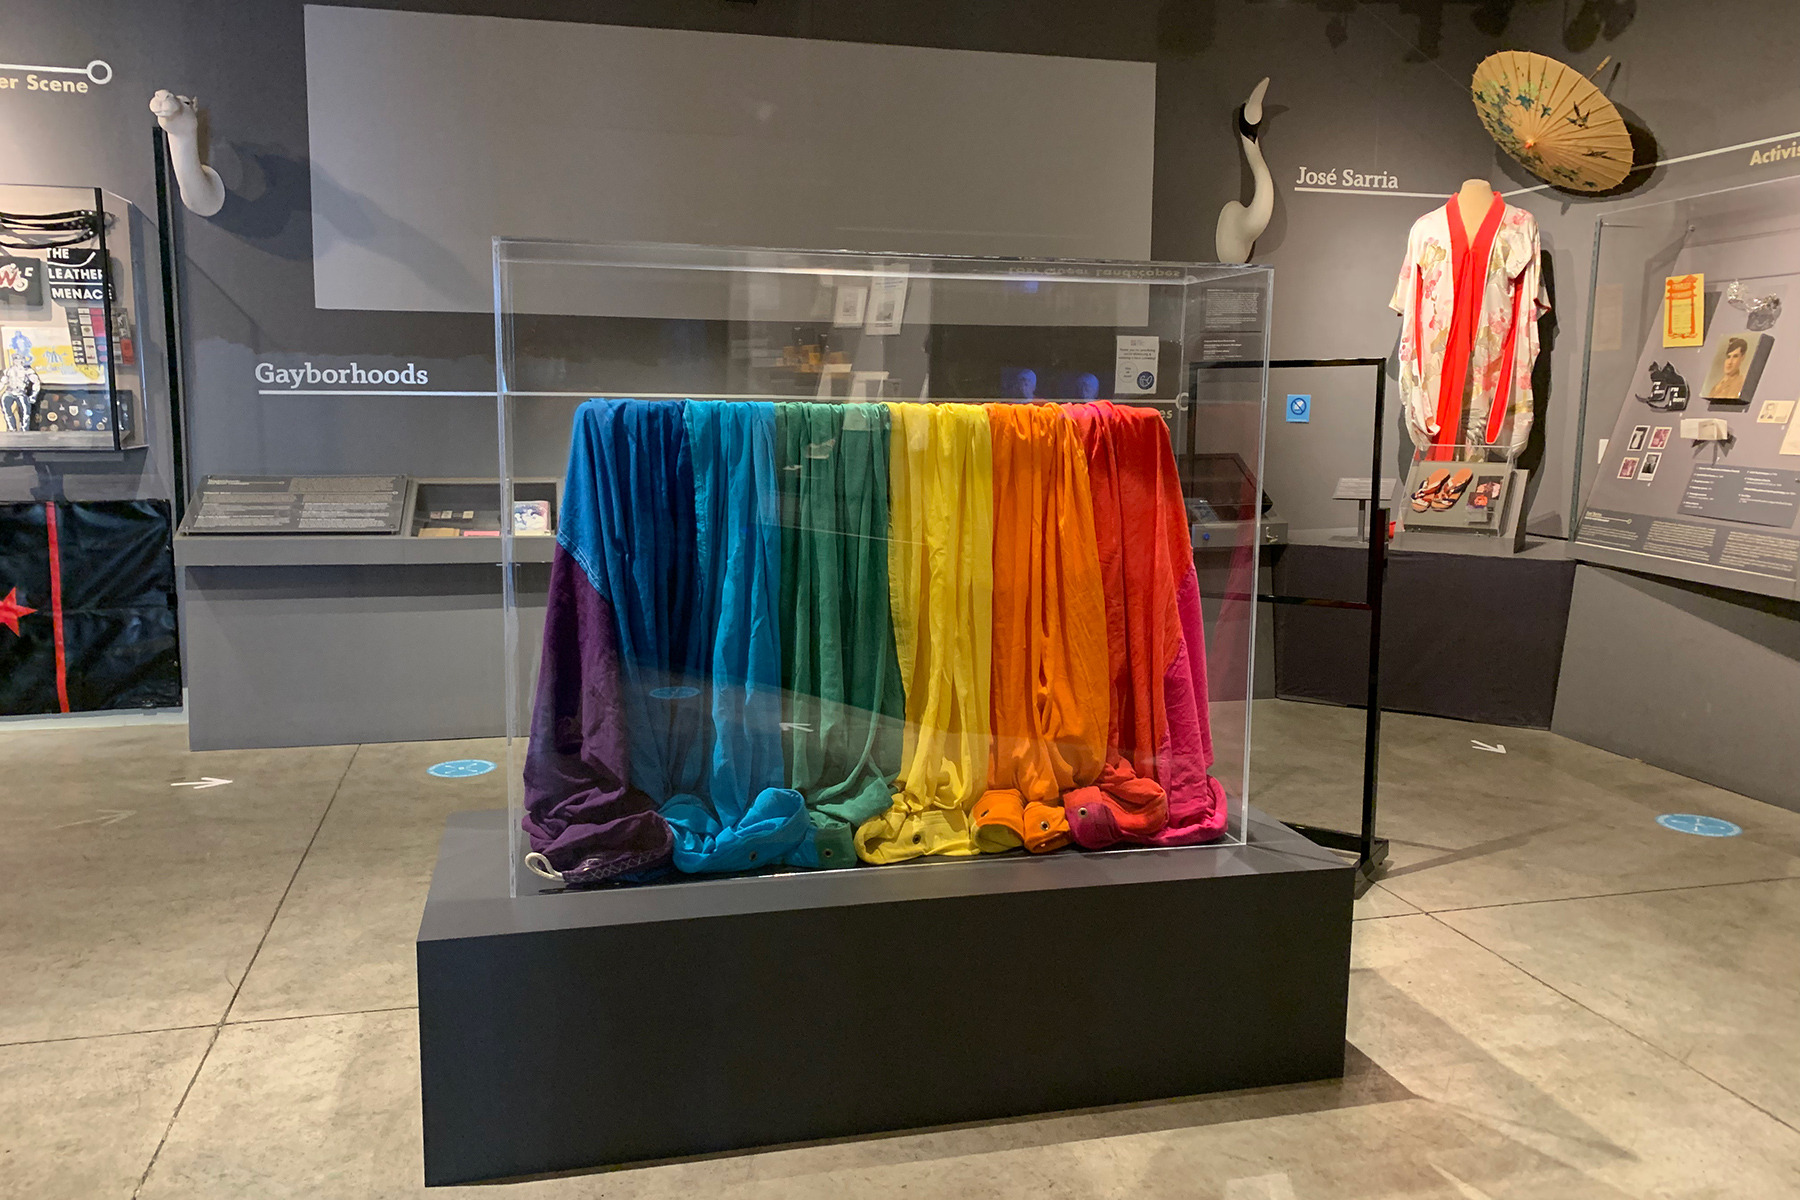 Part of the original Pride flag designed and sew by Gilbert Baker in 1978